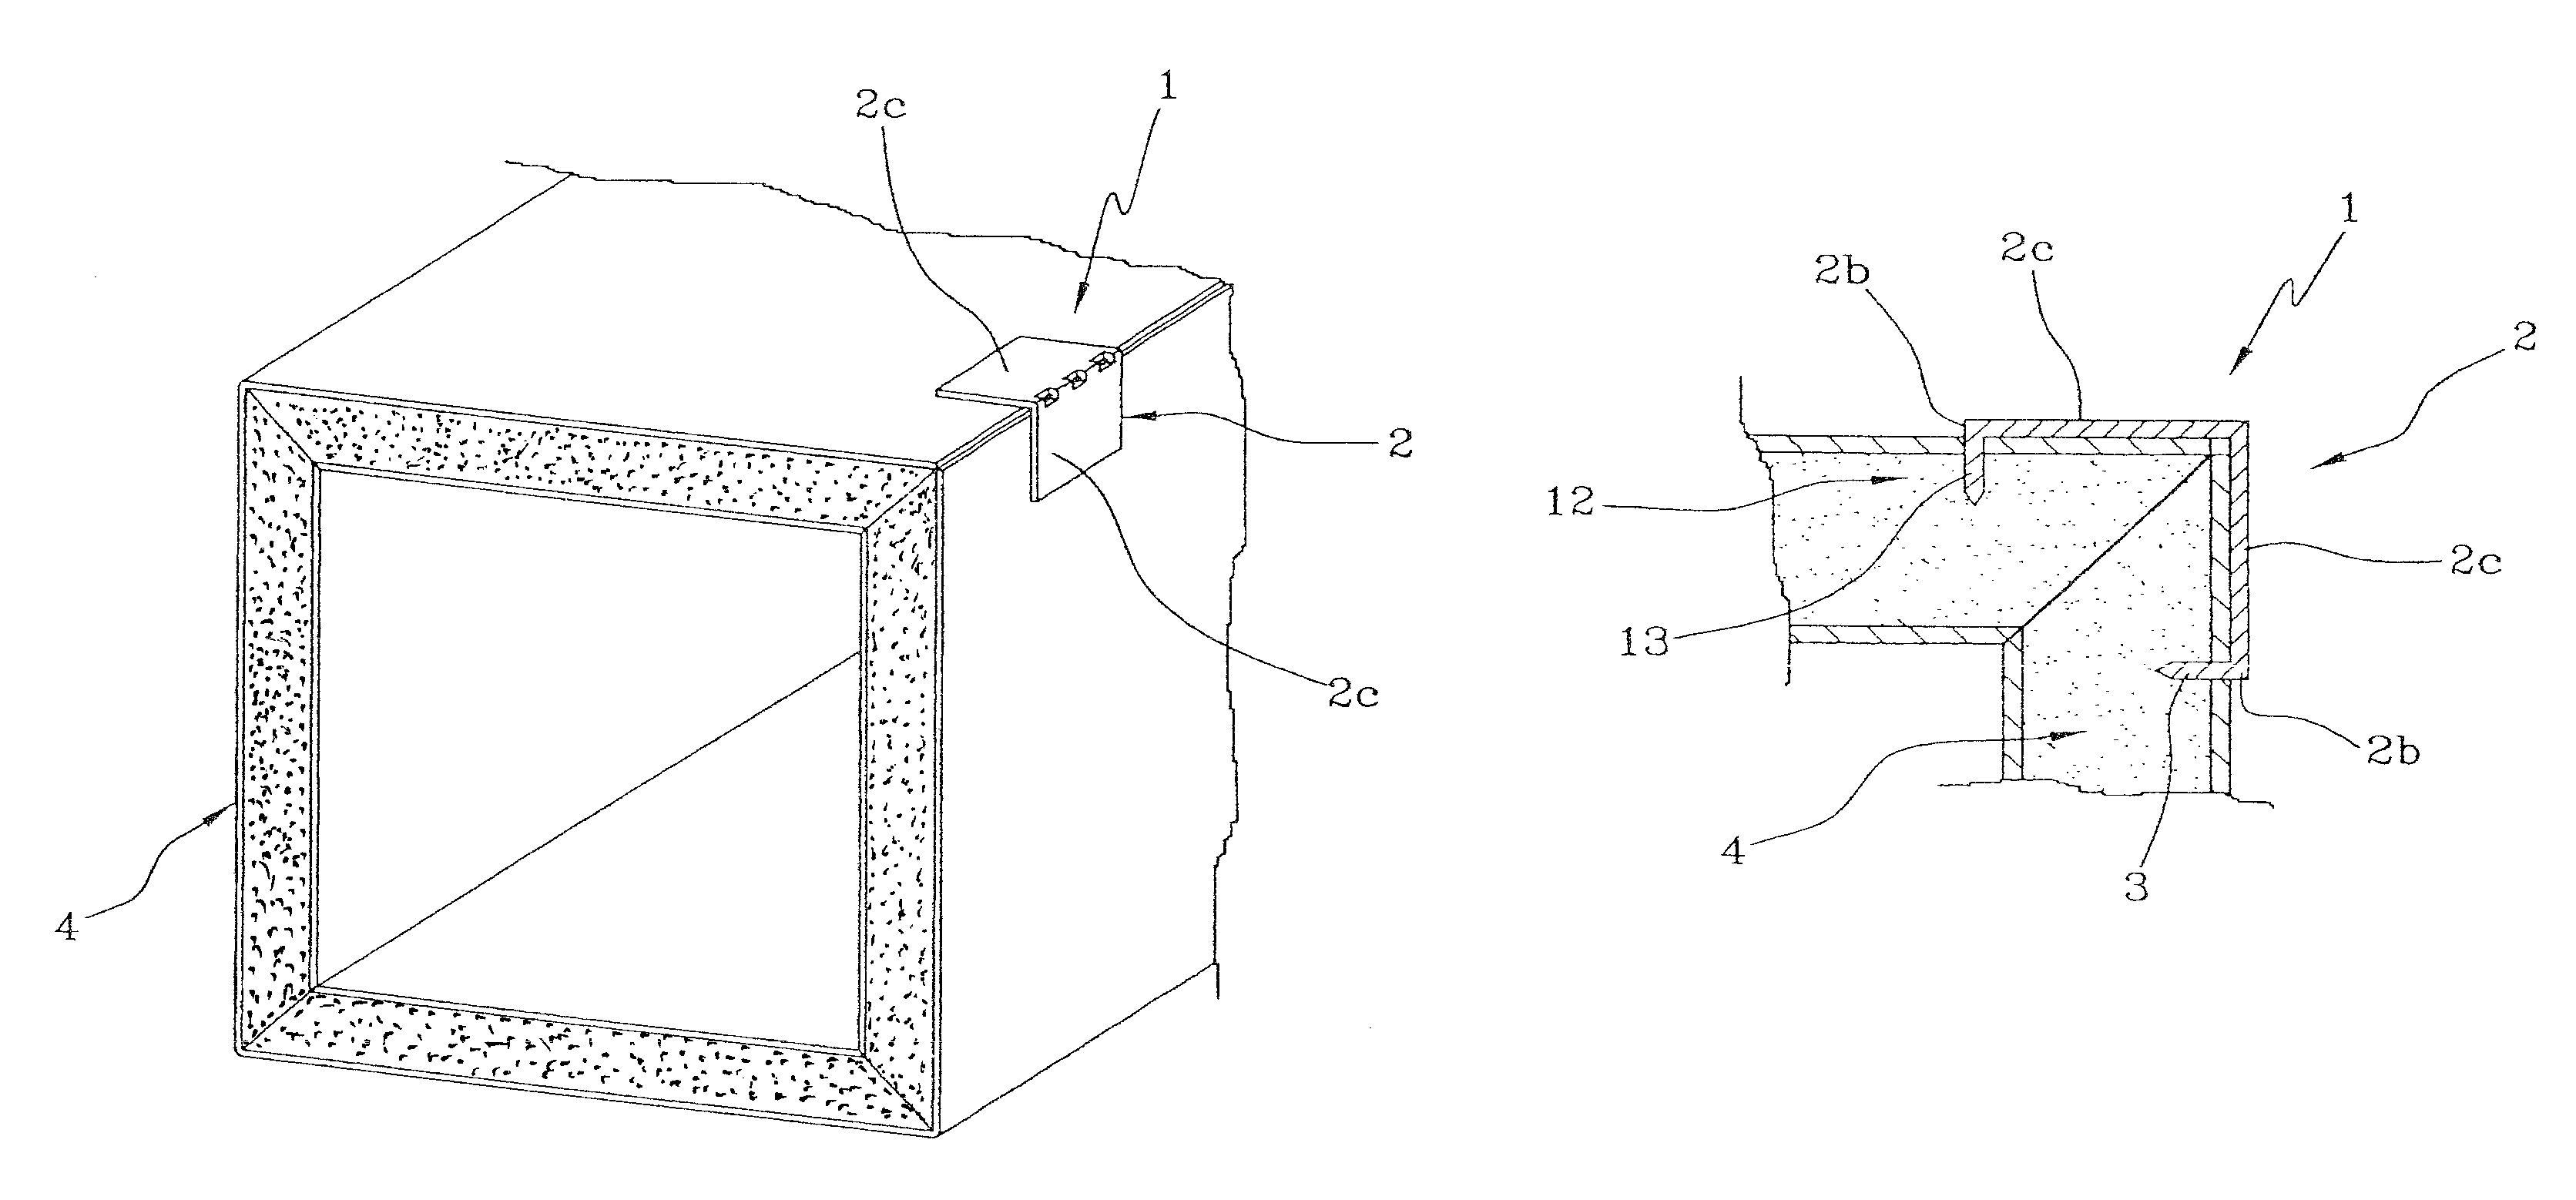 Connecting device and process for the manufacture of ducts for heating, conditioning, and ventilation